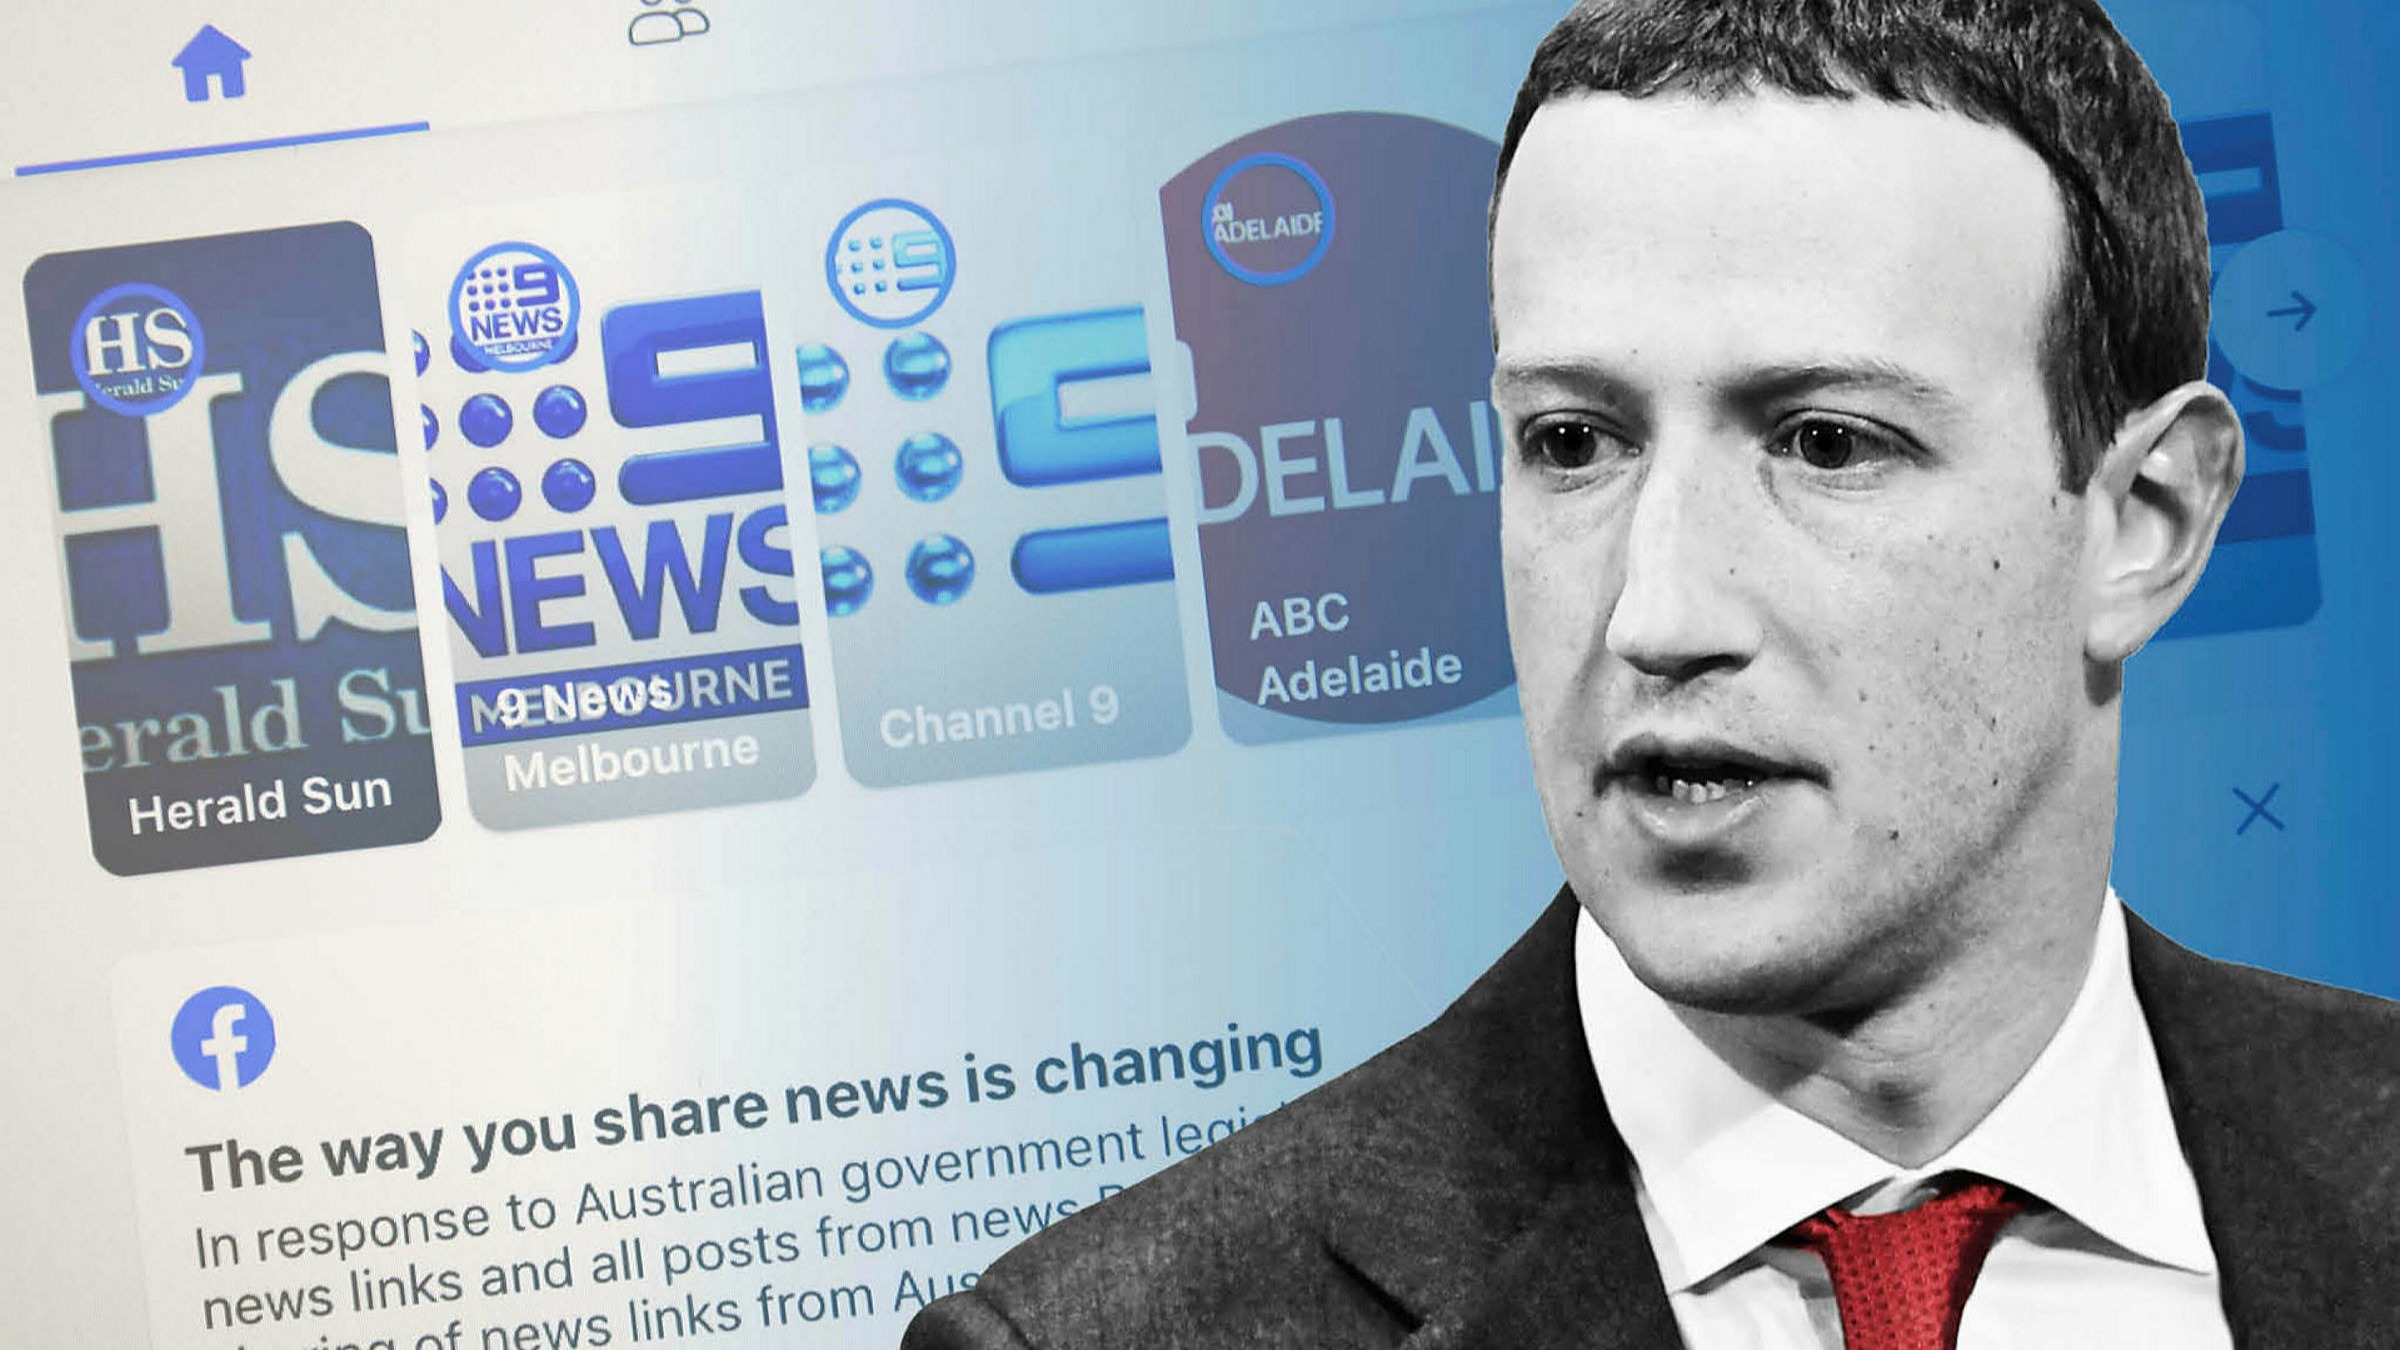 folder Isaac satellit Facebook agrees to pay News Corp for content in Australia | Financial Times